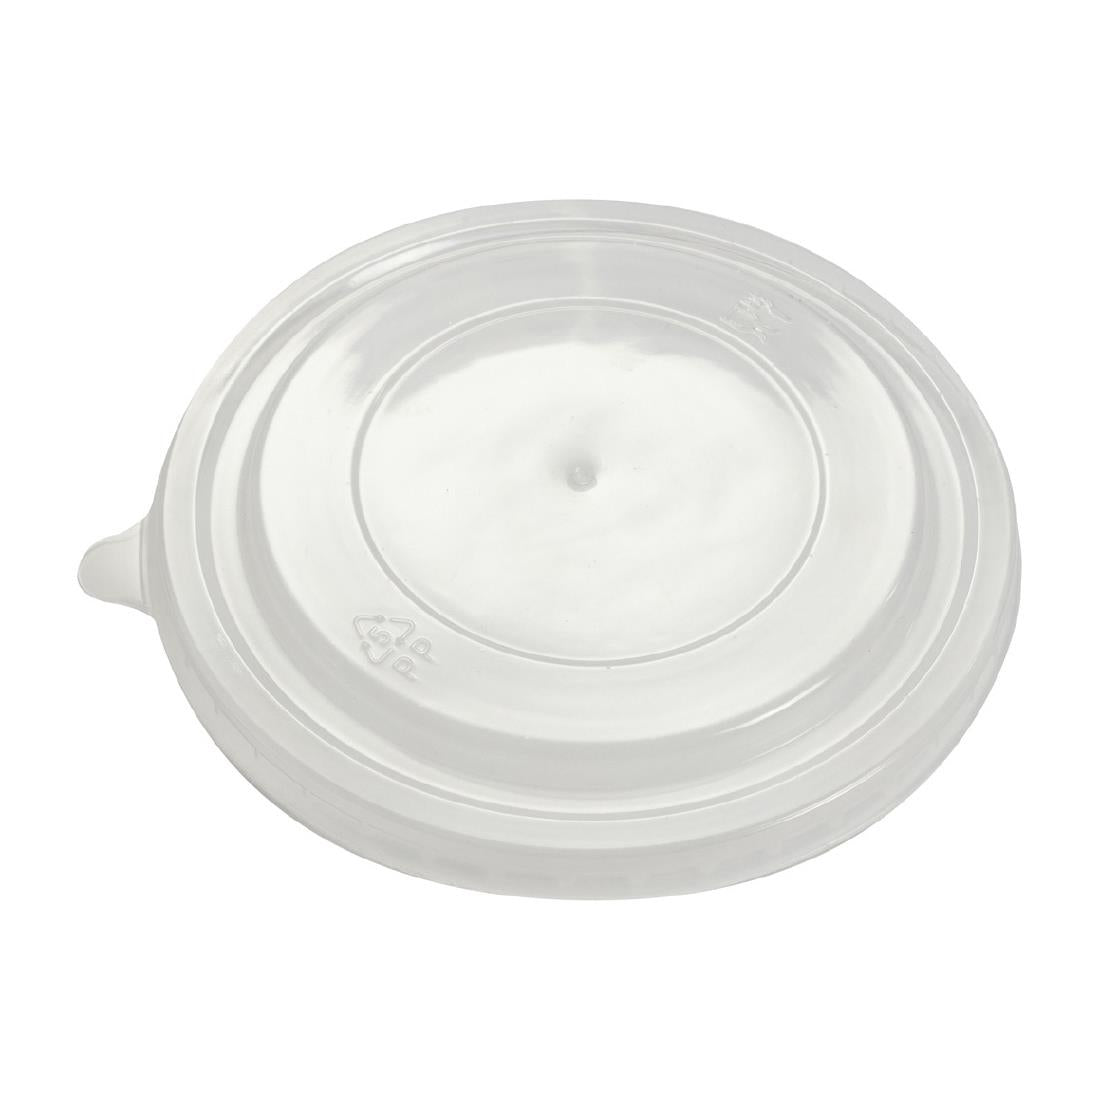 HP694 Colpac Stagione Poke Bowl Lid 600ml (Pack of 300)